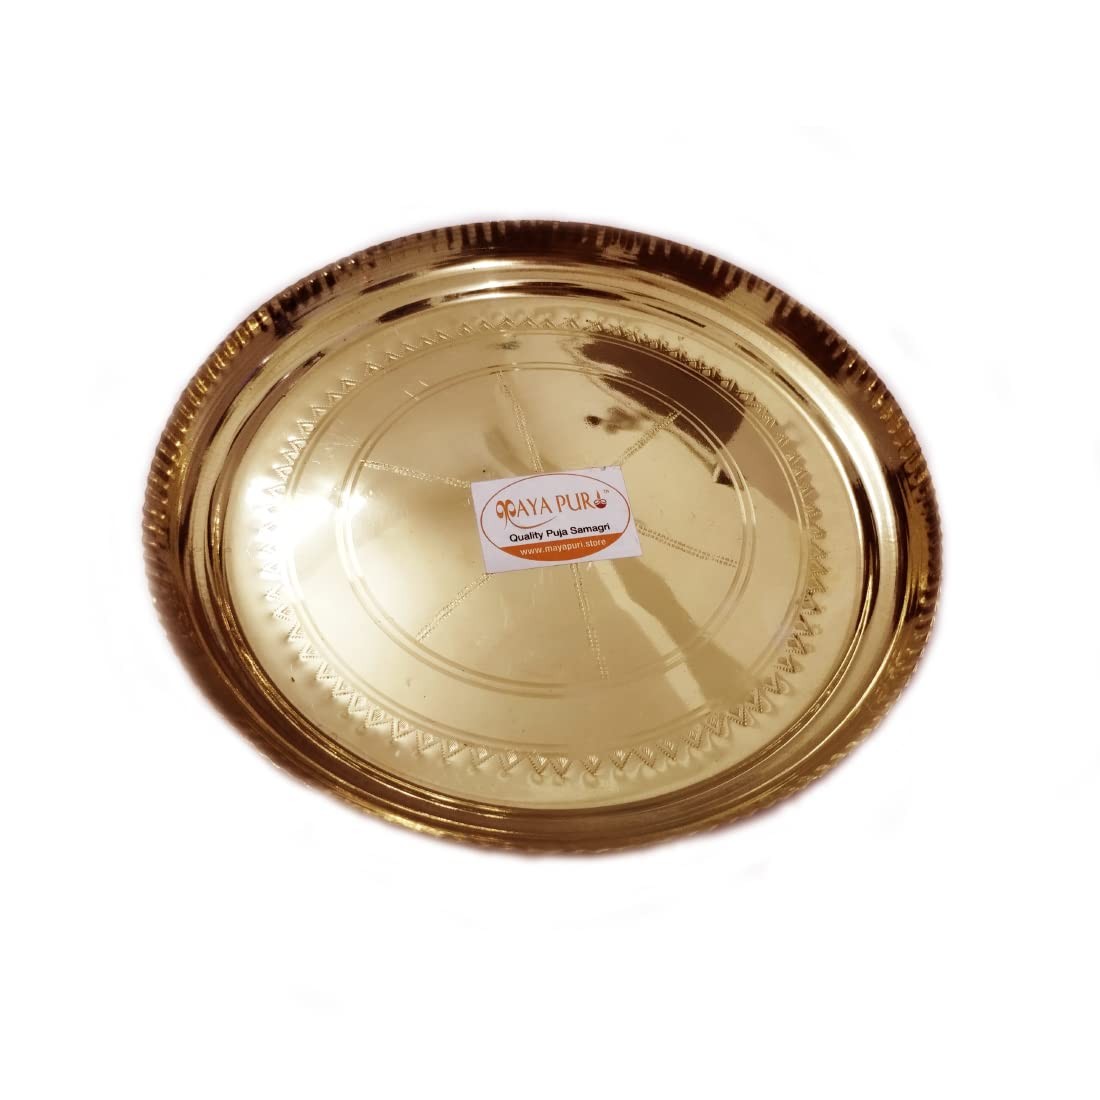 Pure Pital Puja Thali/Brass Bhog Thali for Worship, Engraved Design (Golden Colour) (6.5 inches)